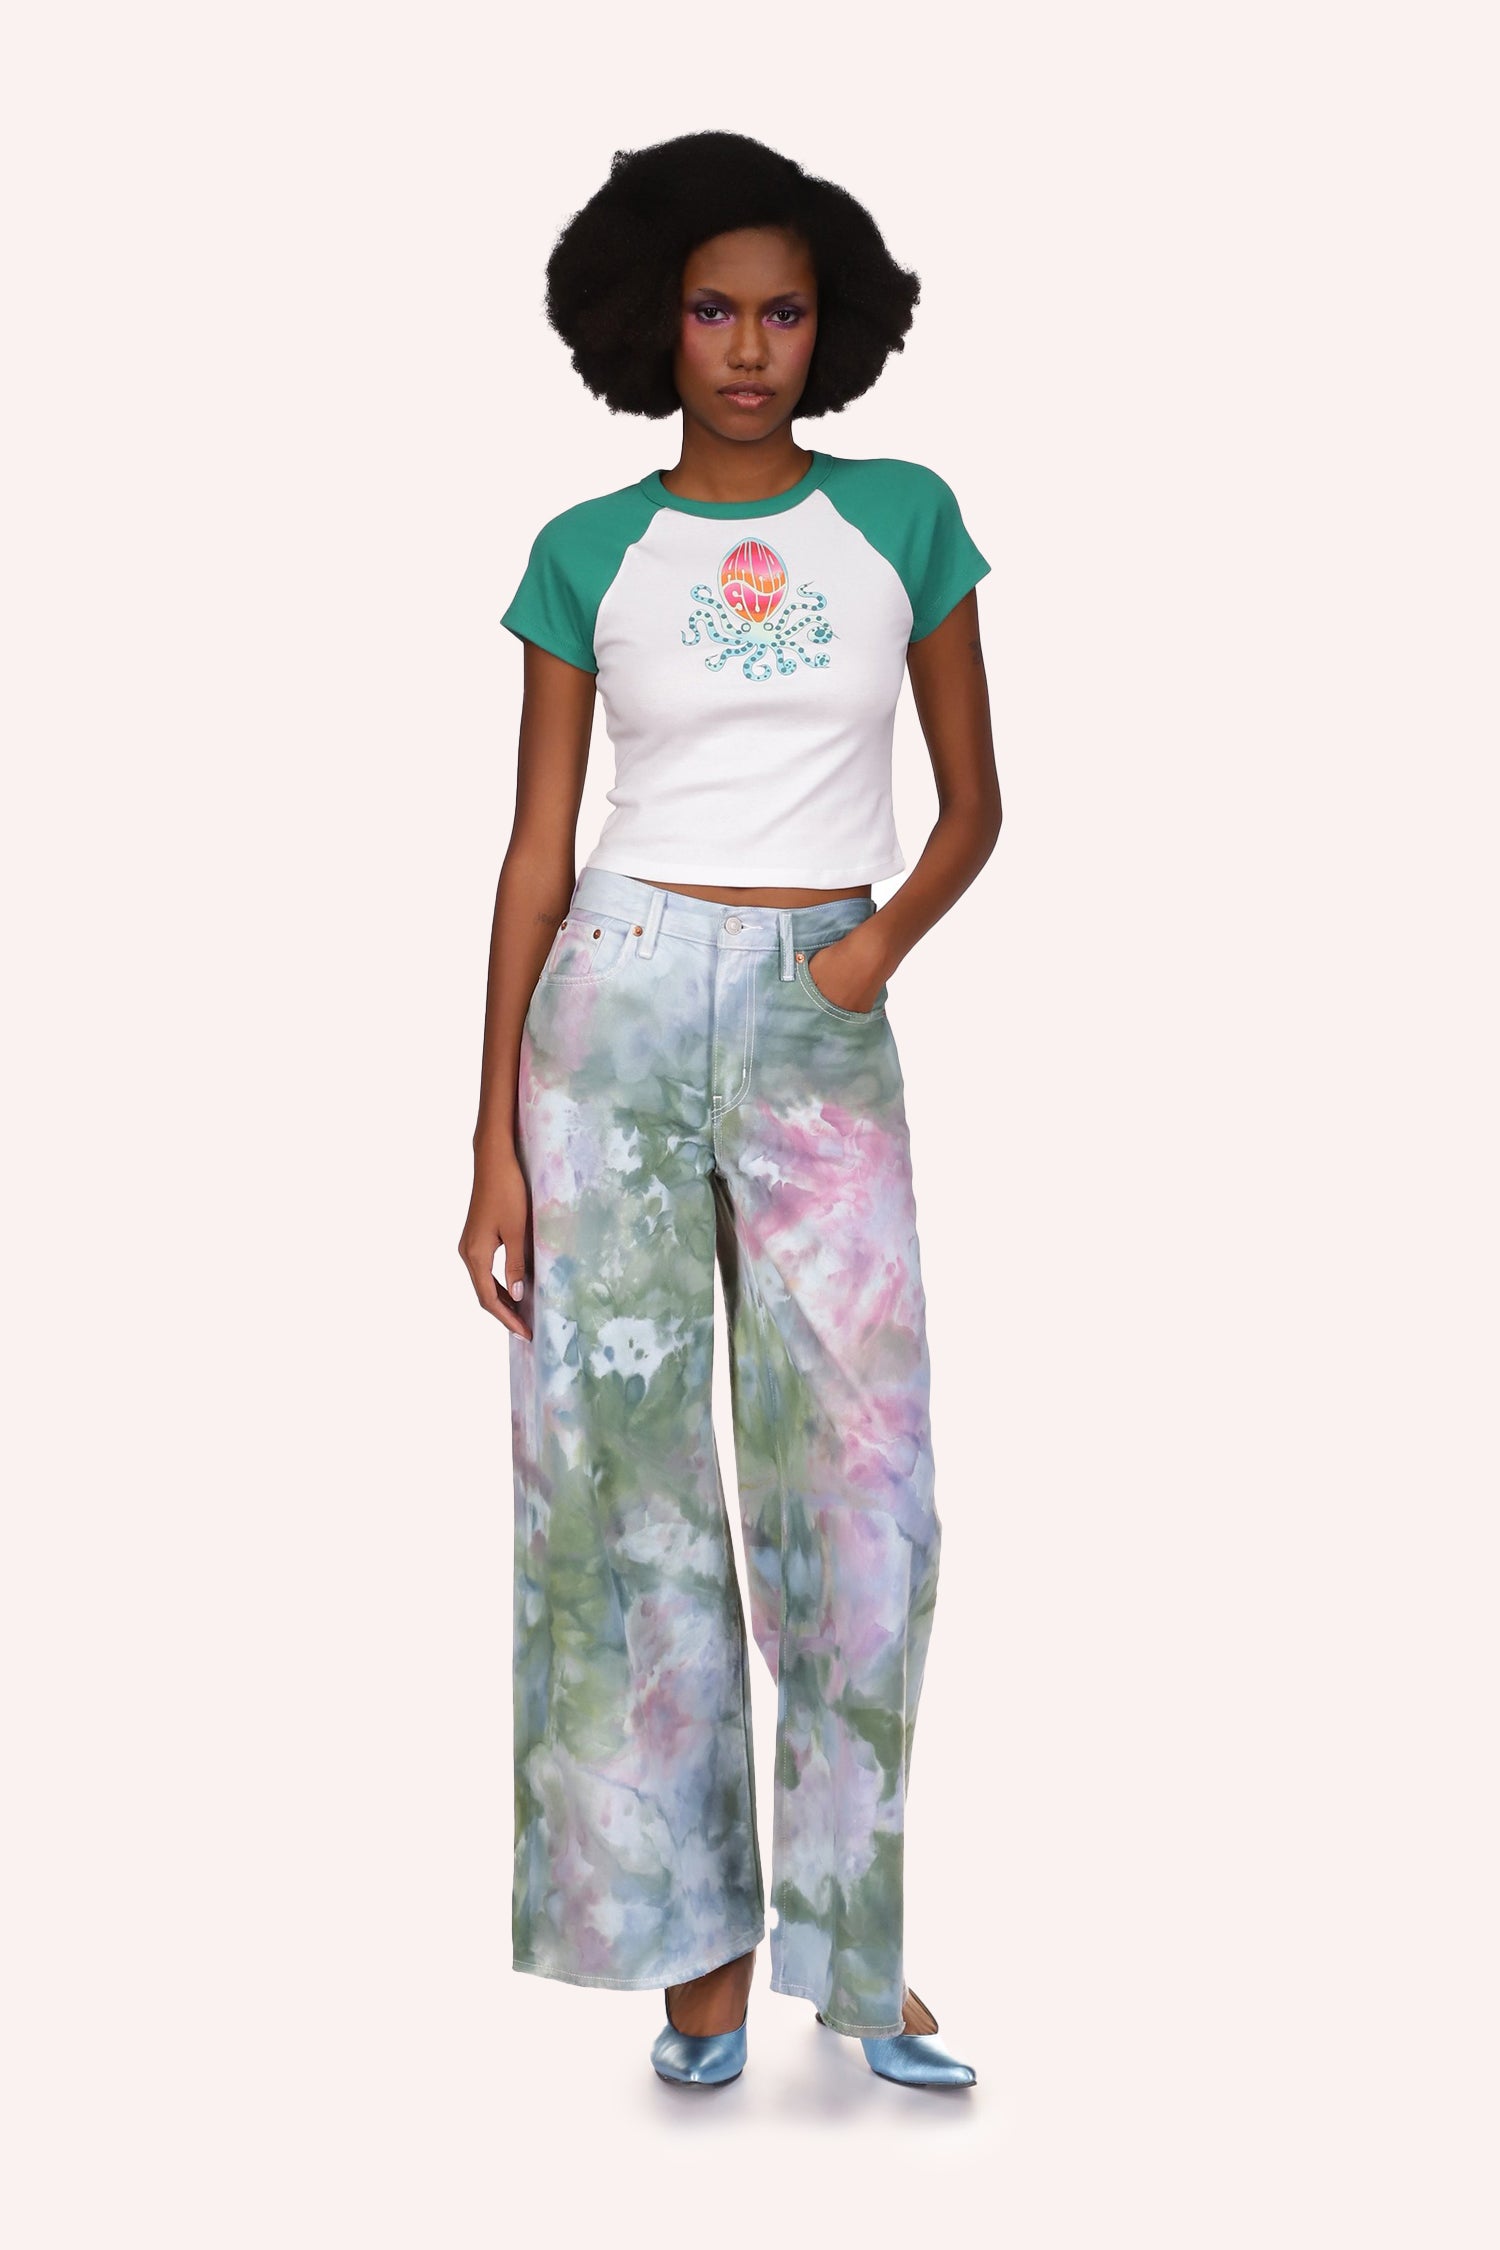 Ocean Tie Dye Wide Leg Jeans, green floral design with touch of pink, pants drape over the hips